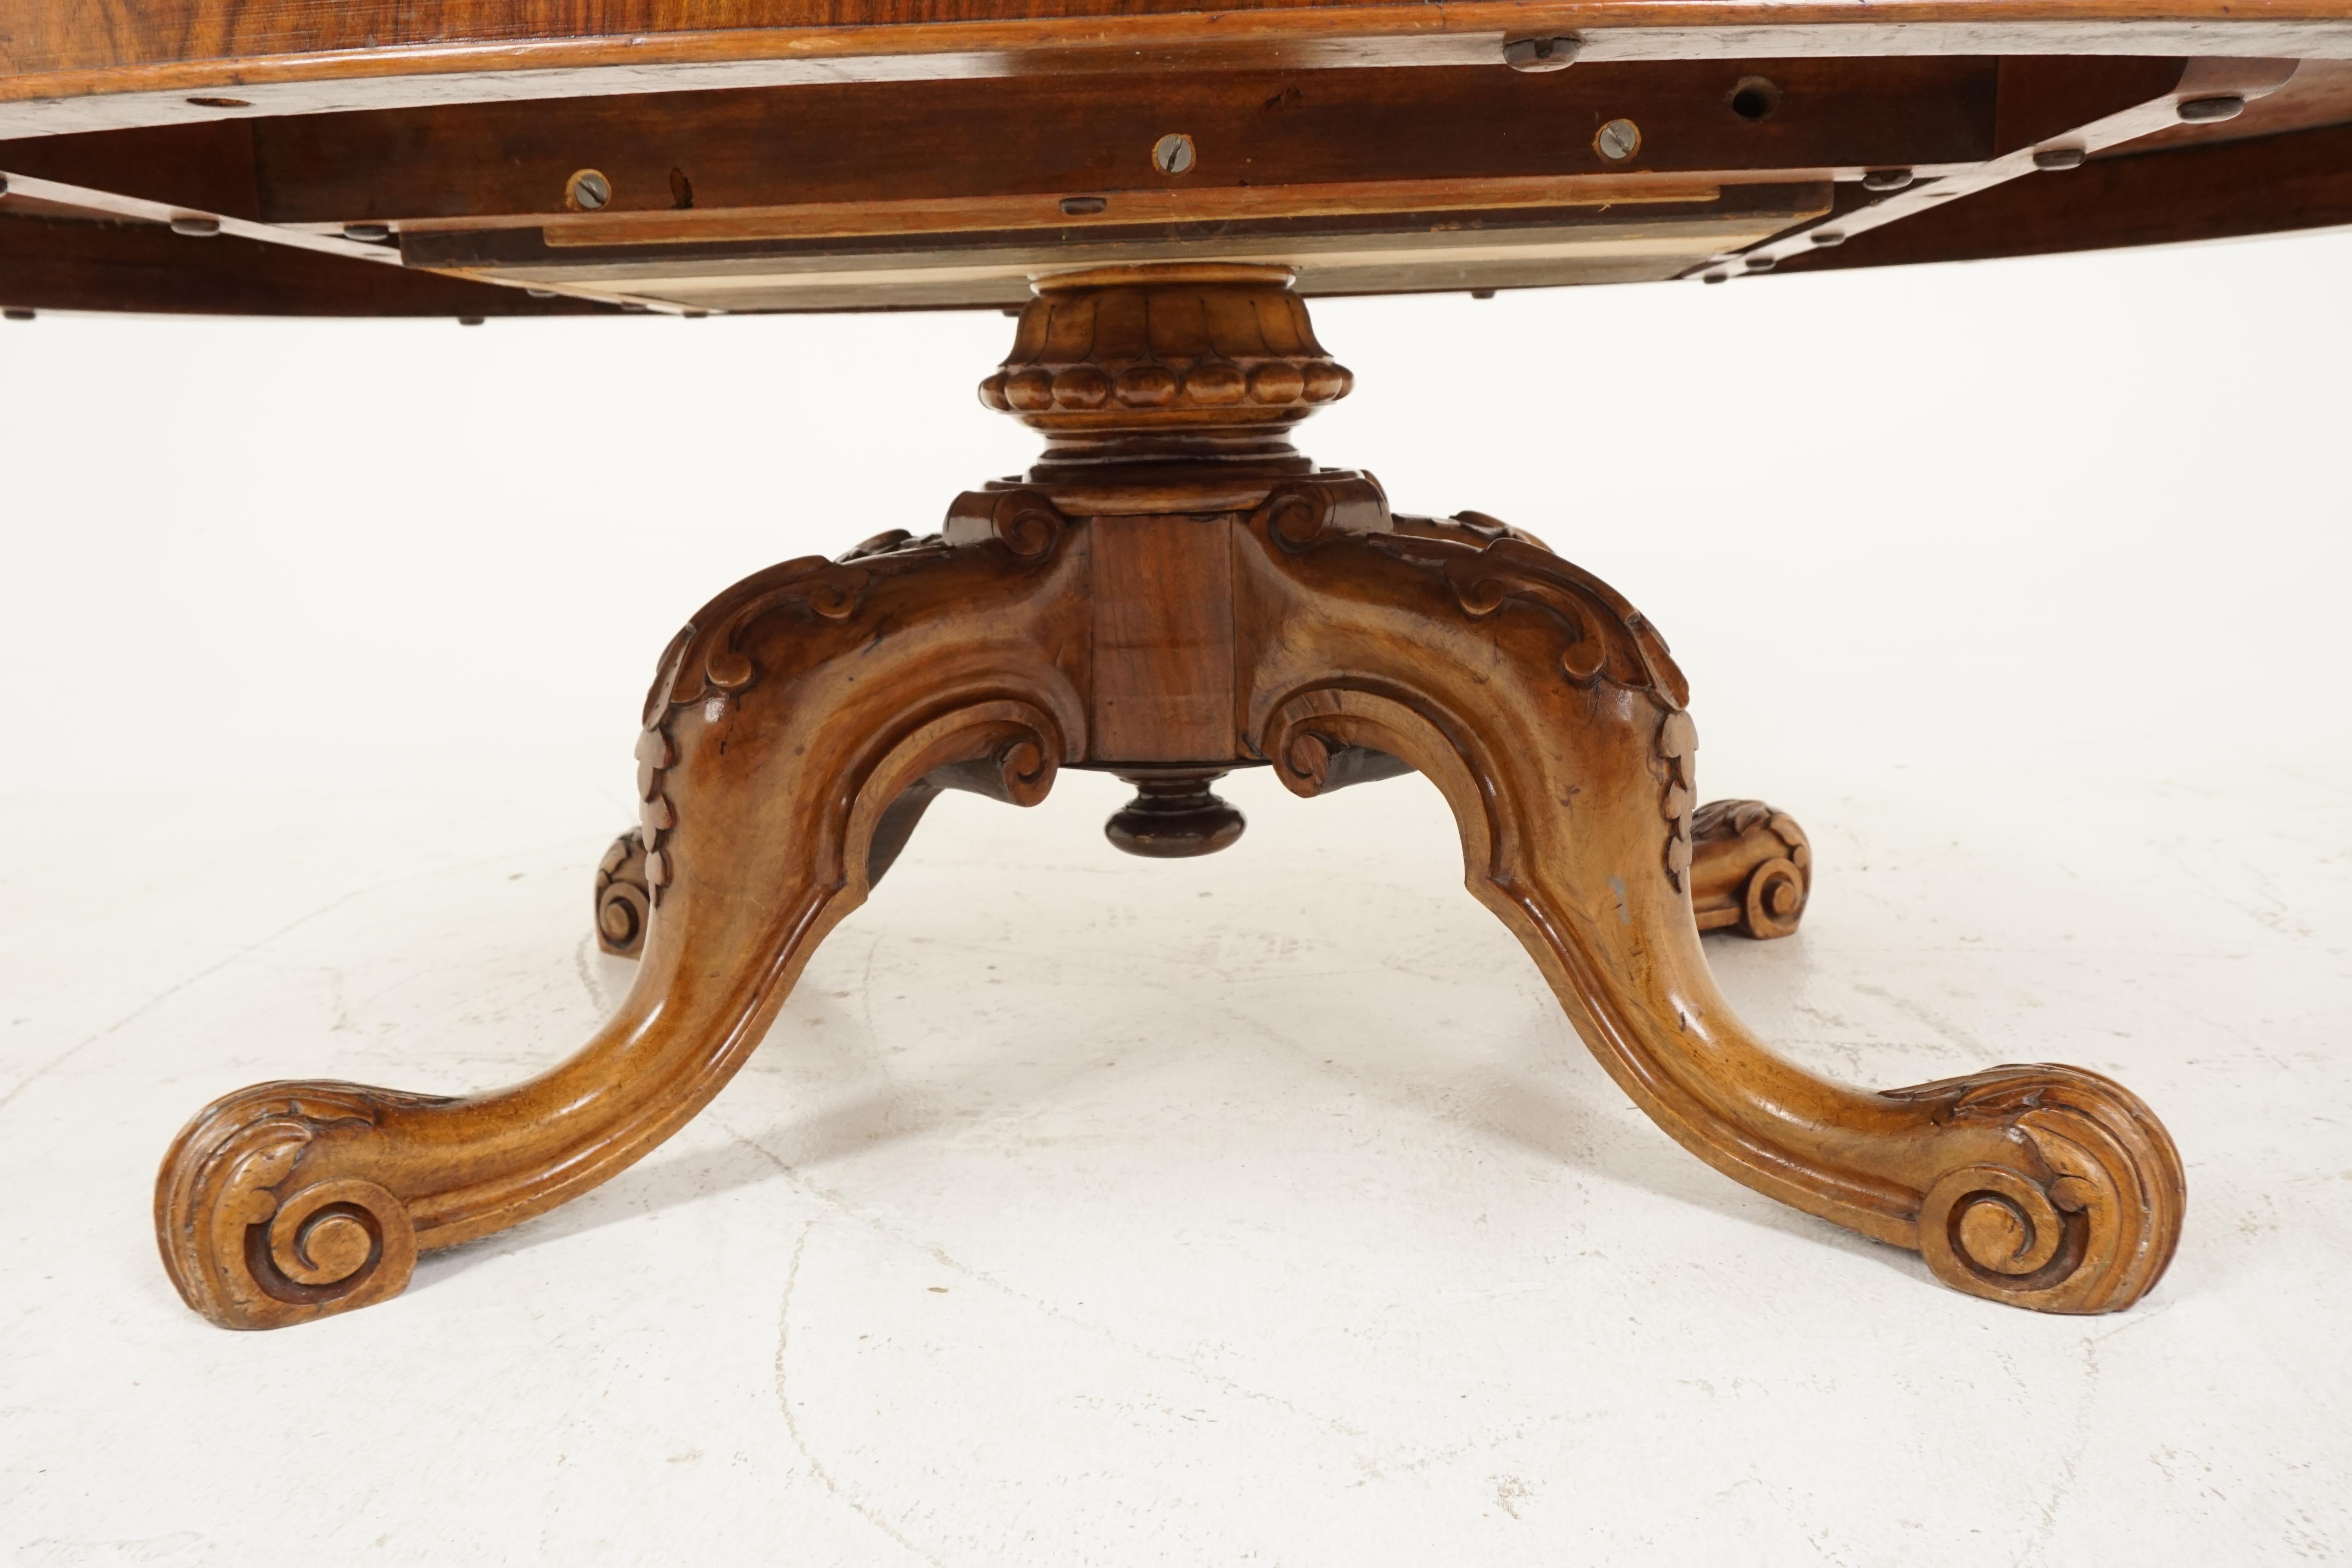 Hand-Crafted Antique Victorian Burr Walnut Reduced Coffee Table, Scotland 1870, B2087